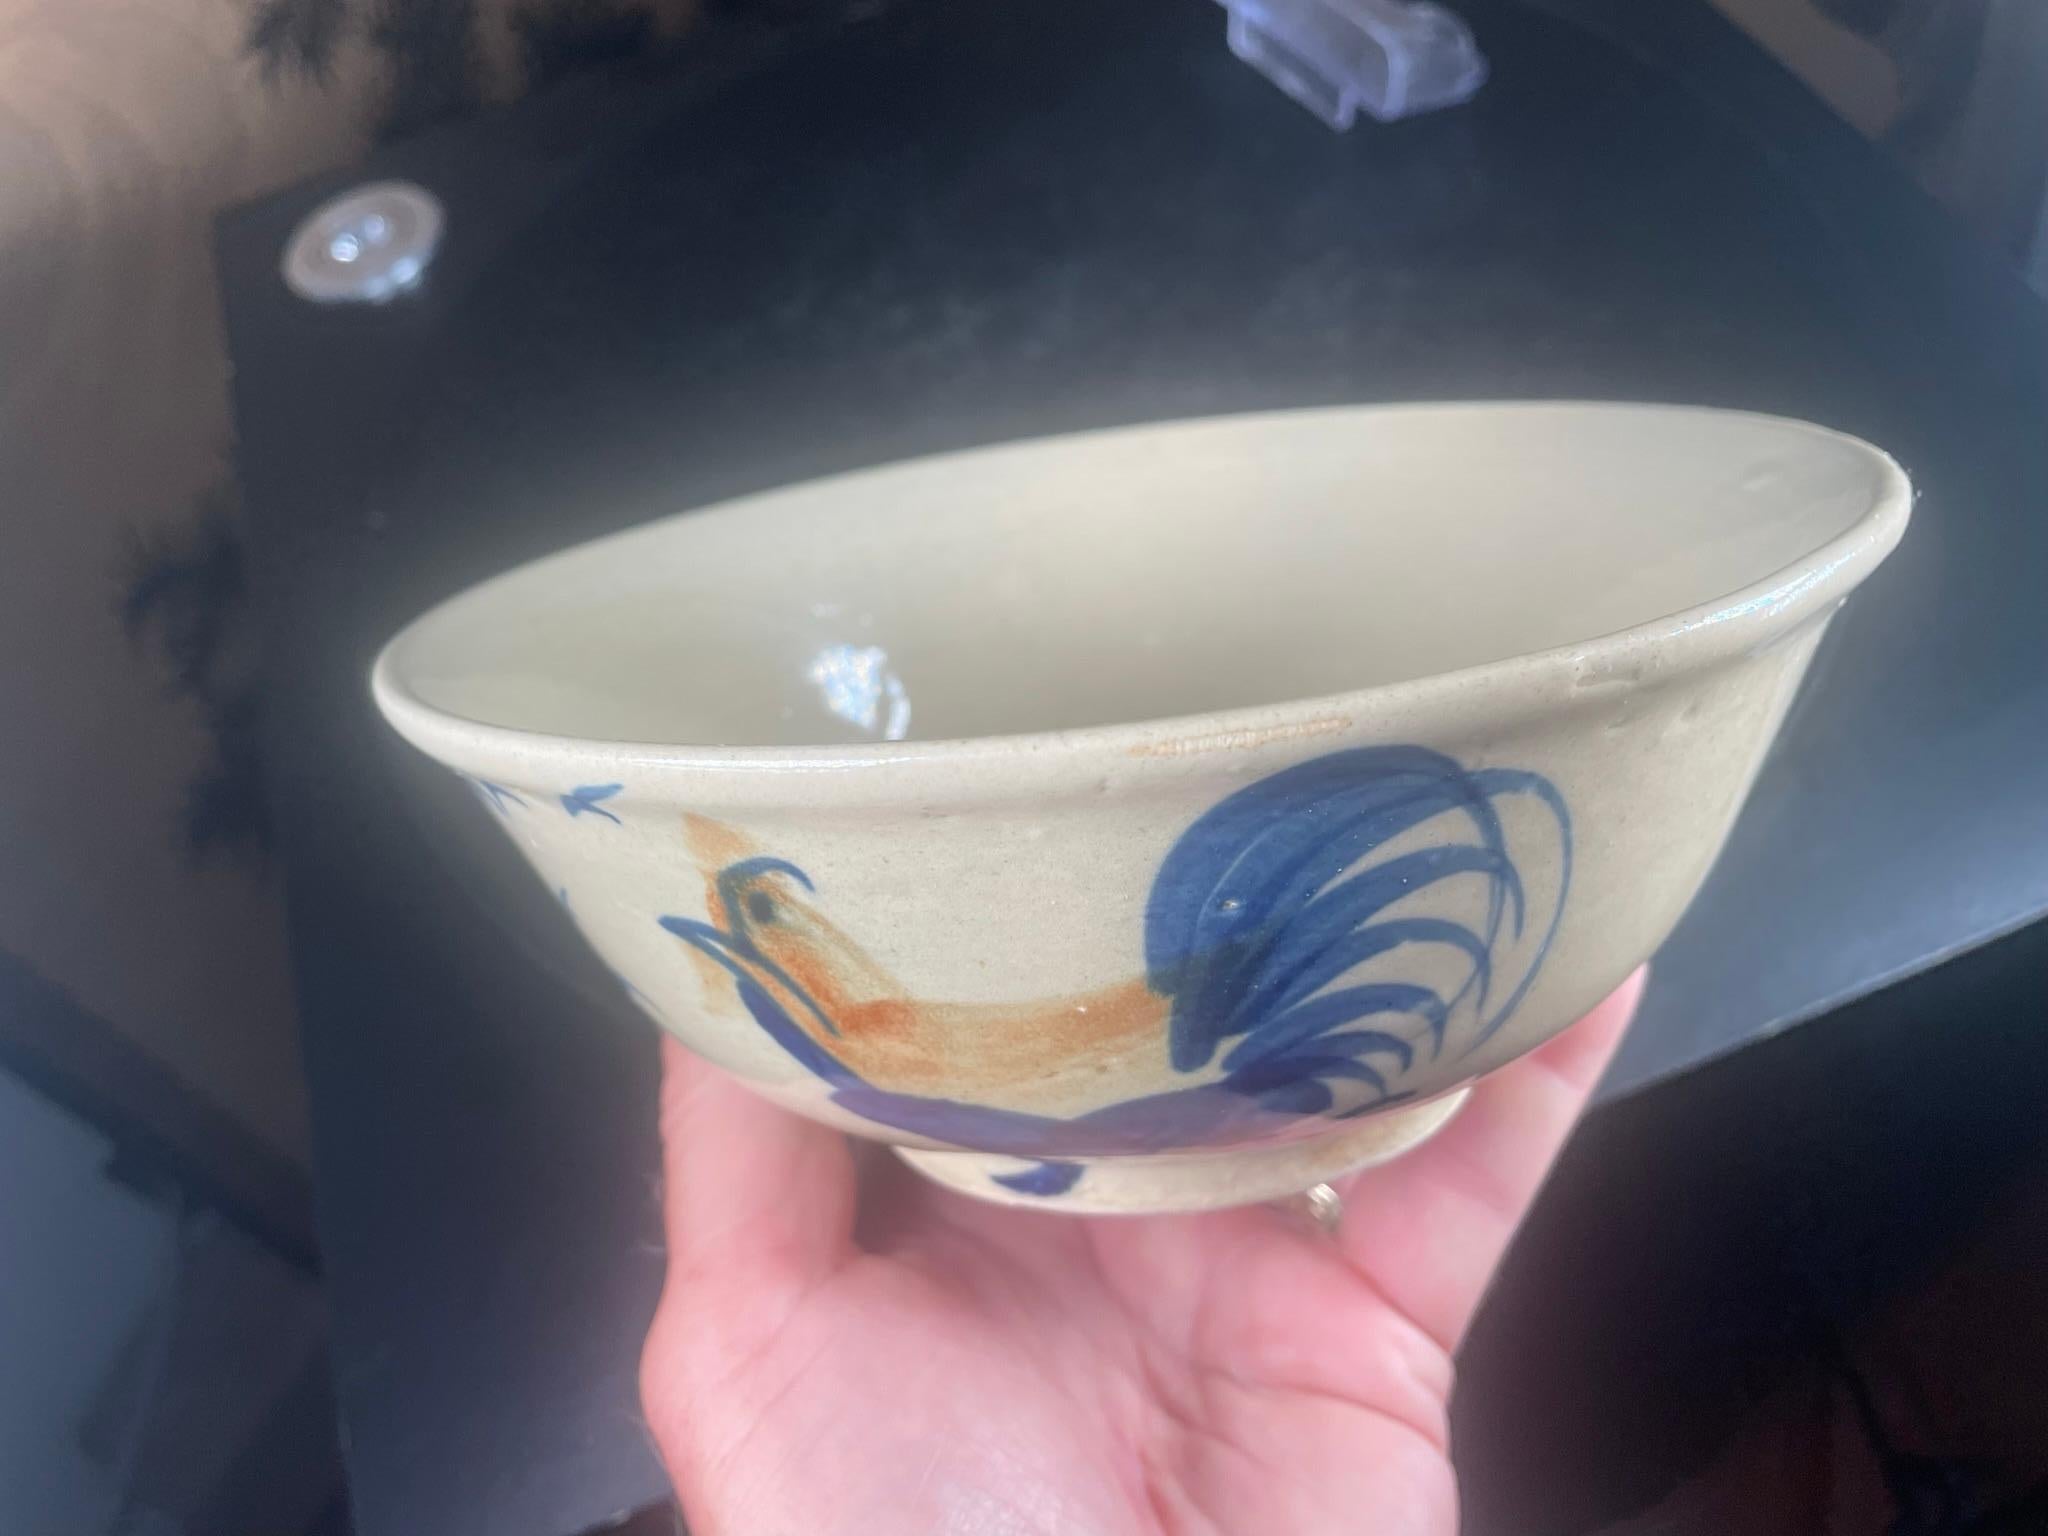 Mint Kyo ware bowl 

From Japan, a beautiful hand-built, painted and glazed, Kyo ware large bowl or large tea bowl with a proud rooster and birds motif created in the 1930s.- over seventy years ago.

A stunning medium blue and oatmeal clay.

Mint